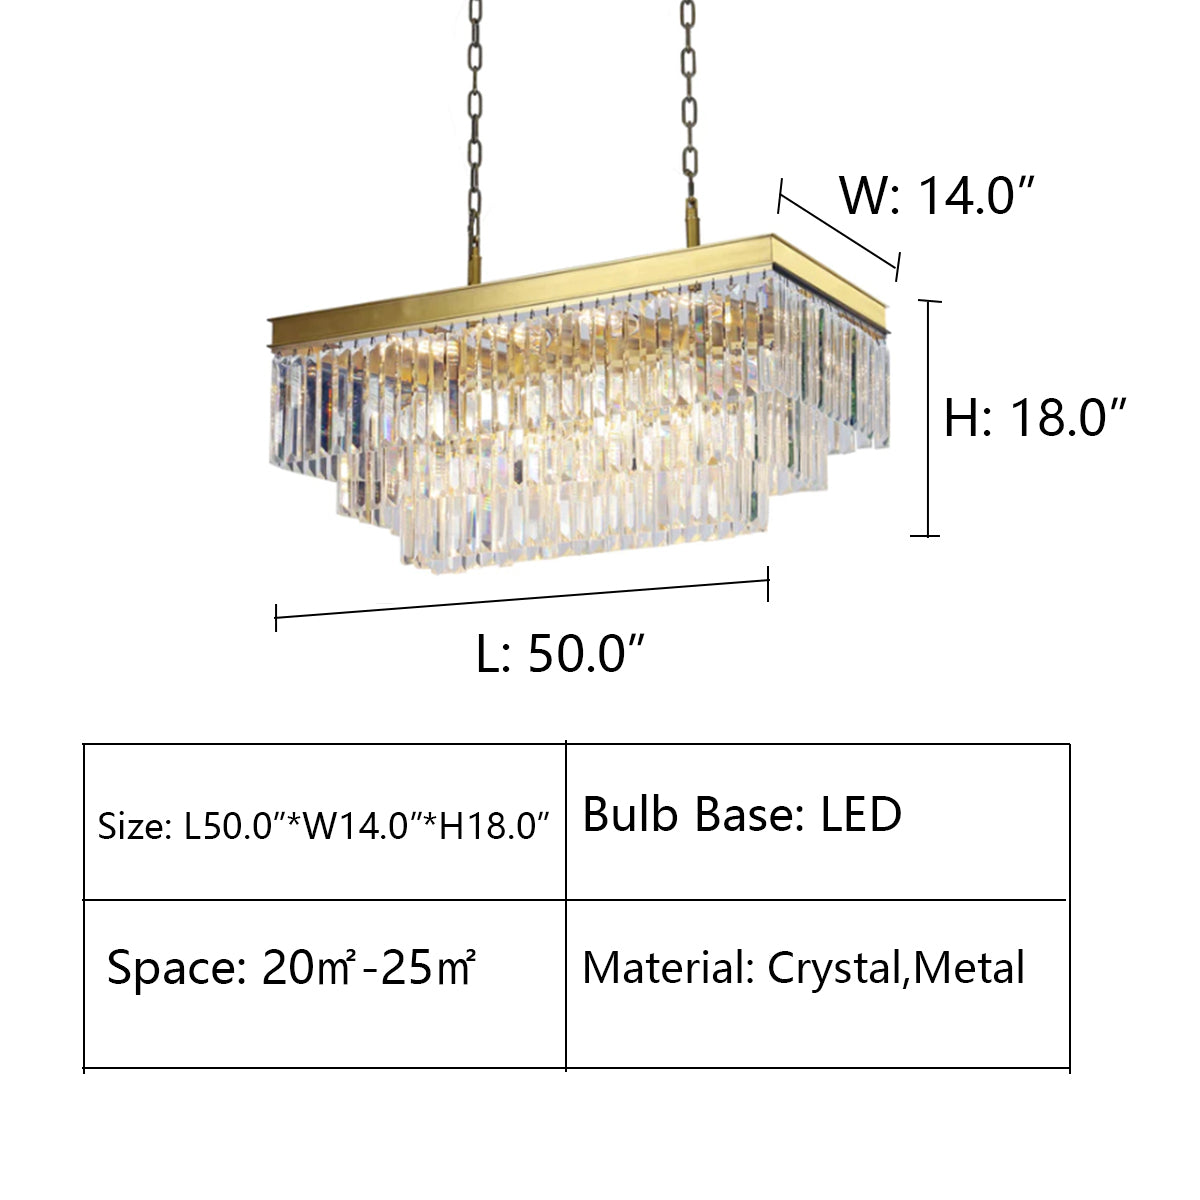 L50.0"*W14.0"*H18.0" Ather 3-Tier Odeon Rectangular Fringe Crystal Chandelier，chandelier,chandeliers,crystal,metal,gold,black,rectangle,tiers,layers,multi-tier,multi-layer,ceiling,flush mount,luxury,modern,traditional,classic,dining table,long table,dining room,living room,kitchen island,bar